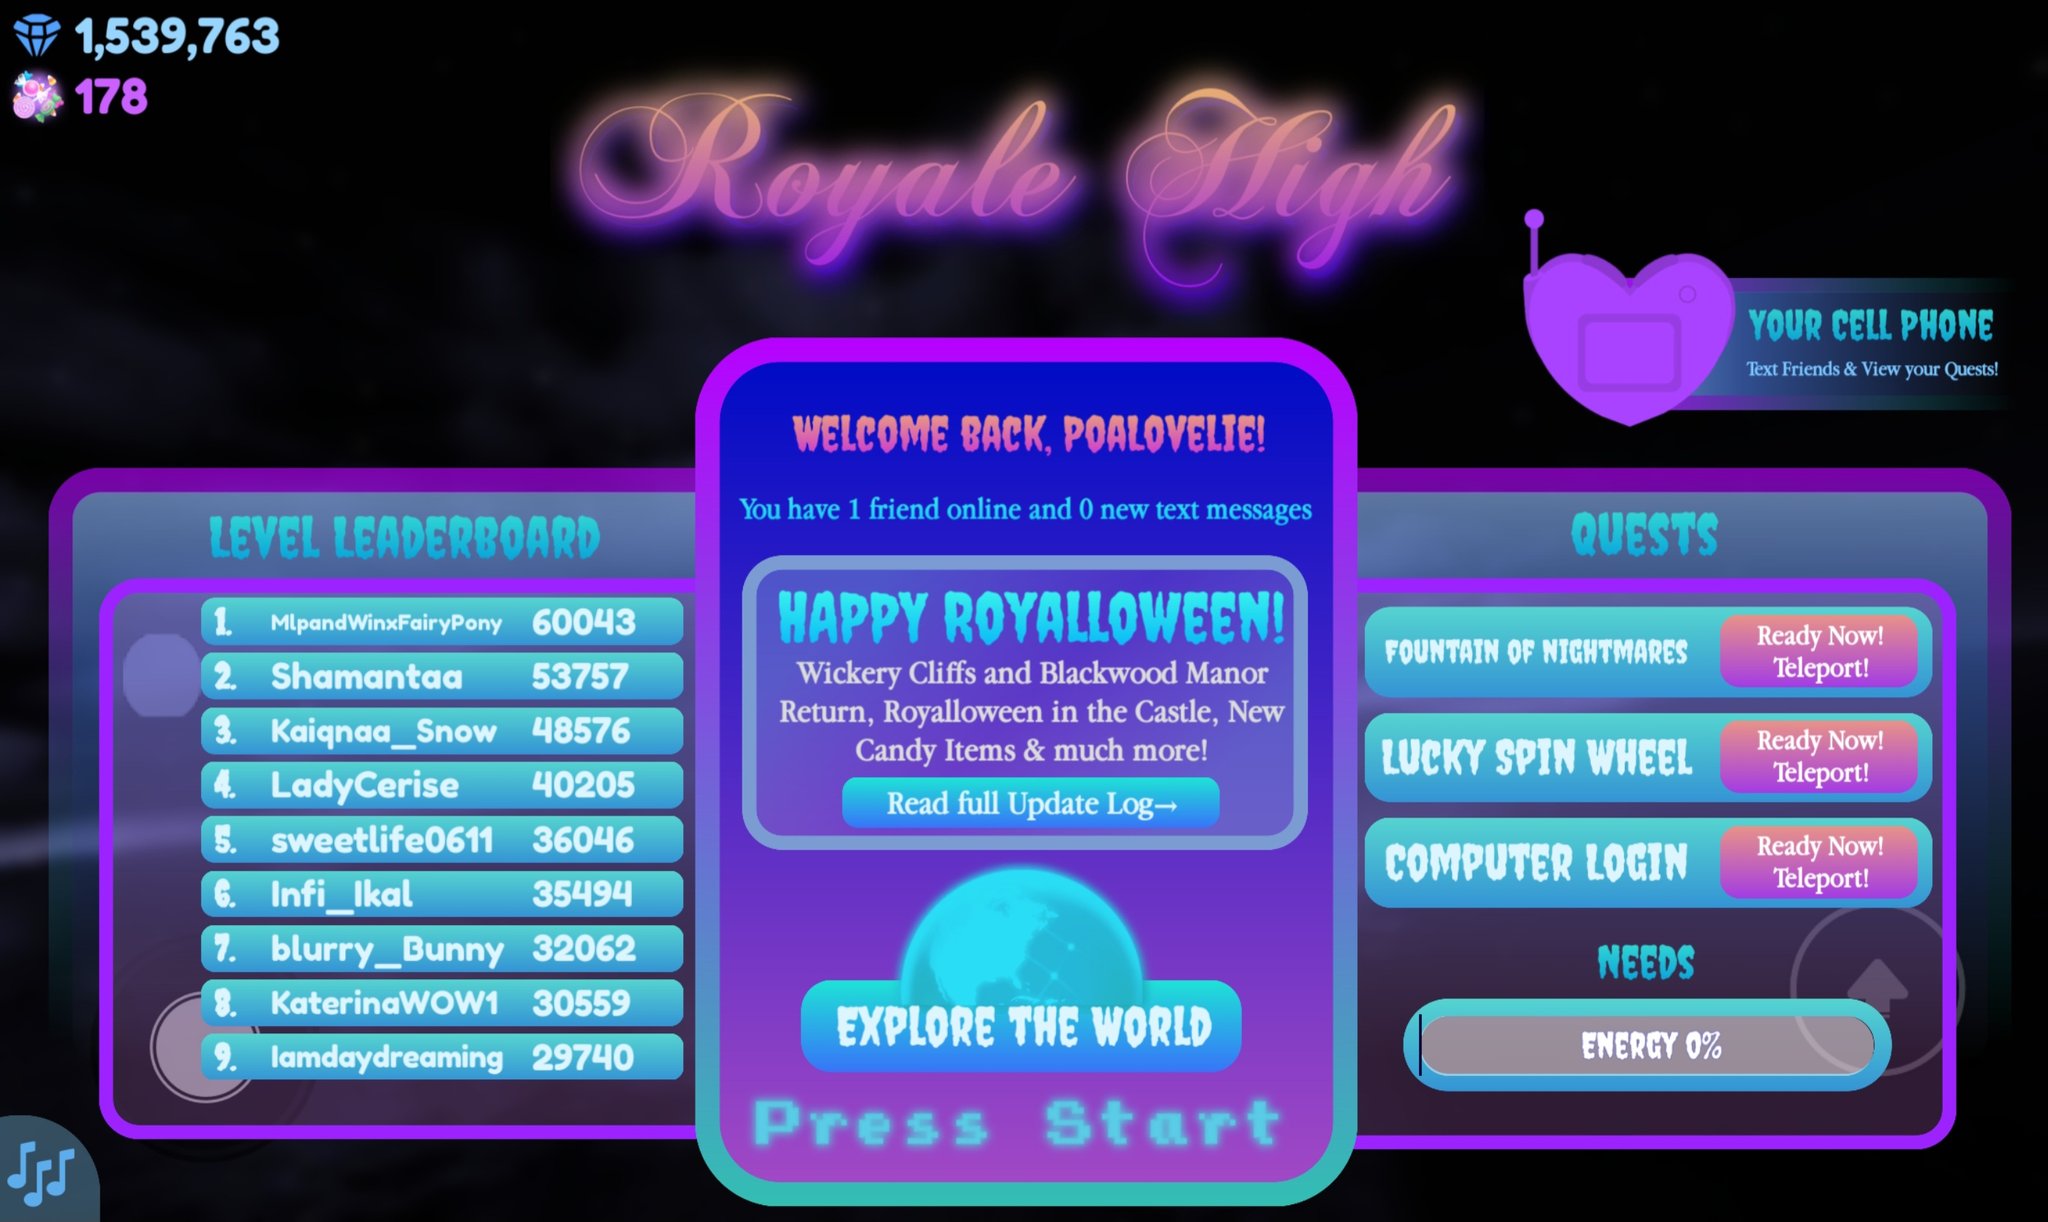 ROYALLOWEEN COMING TODAY!? BARBIE IS ONLINE! WICKERY CLIFFS